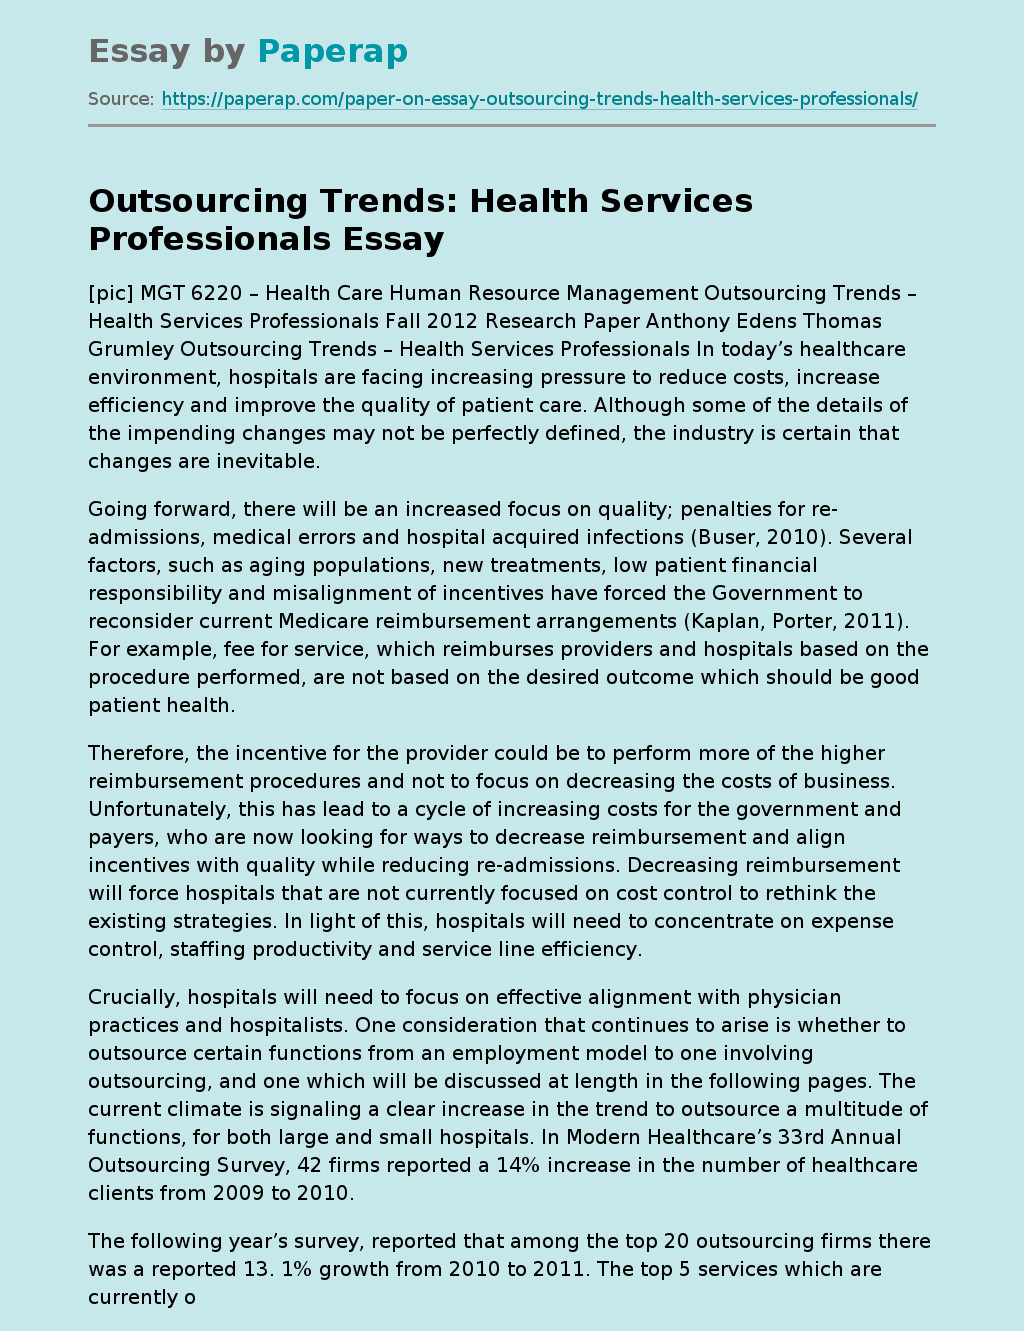 Outsourcing Trends: Health Services Professionals